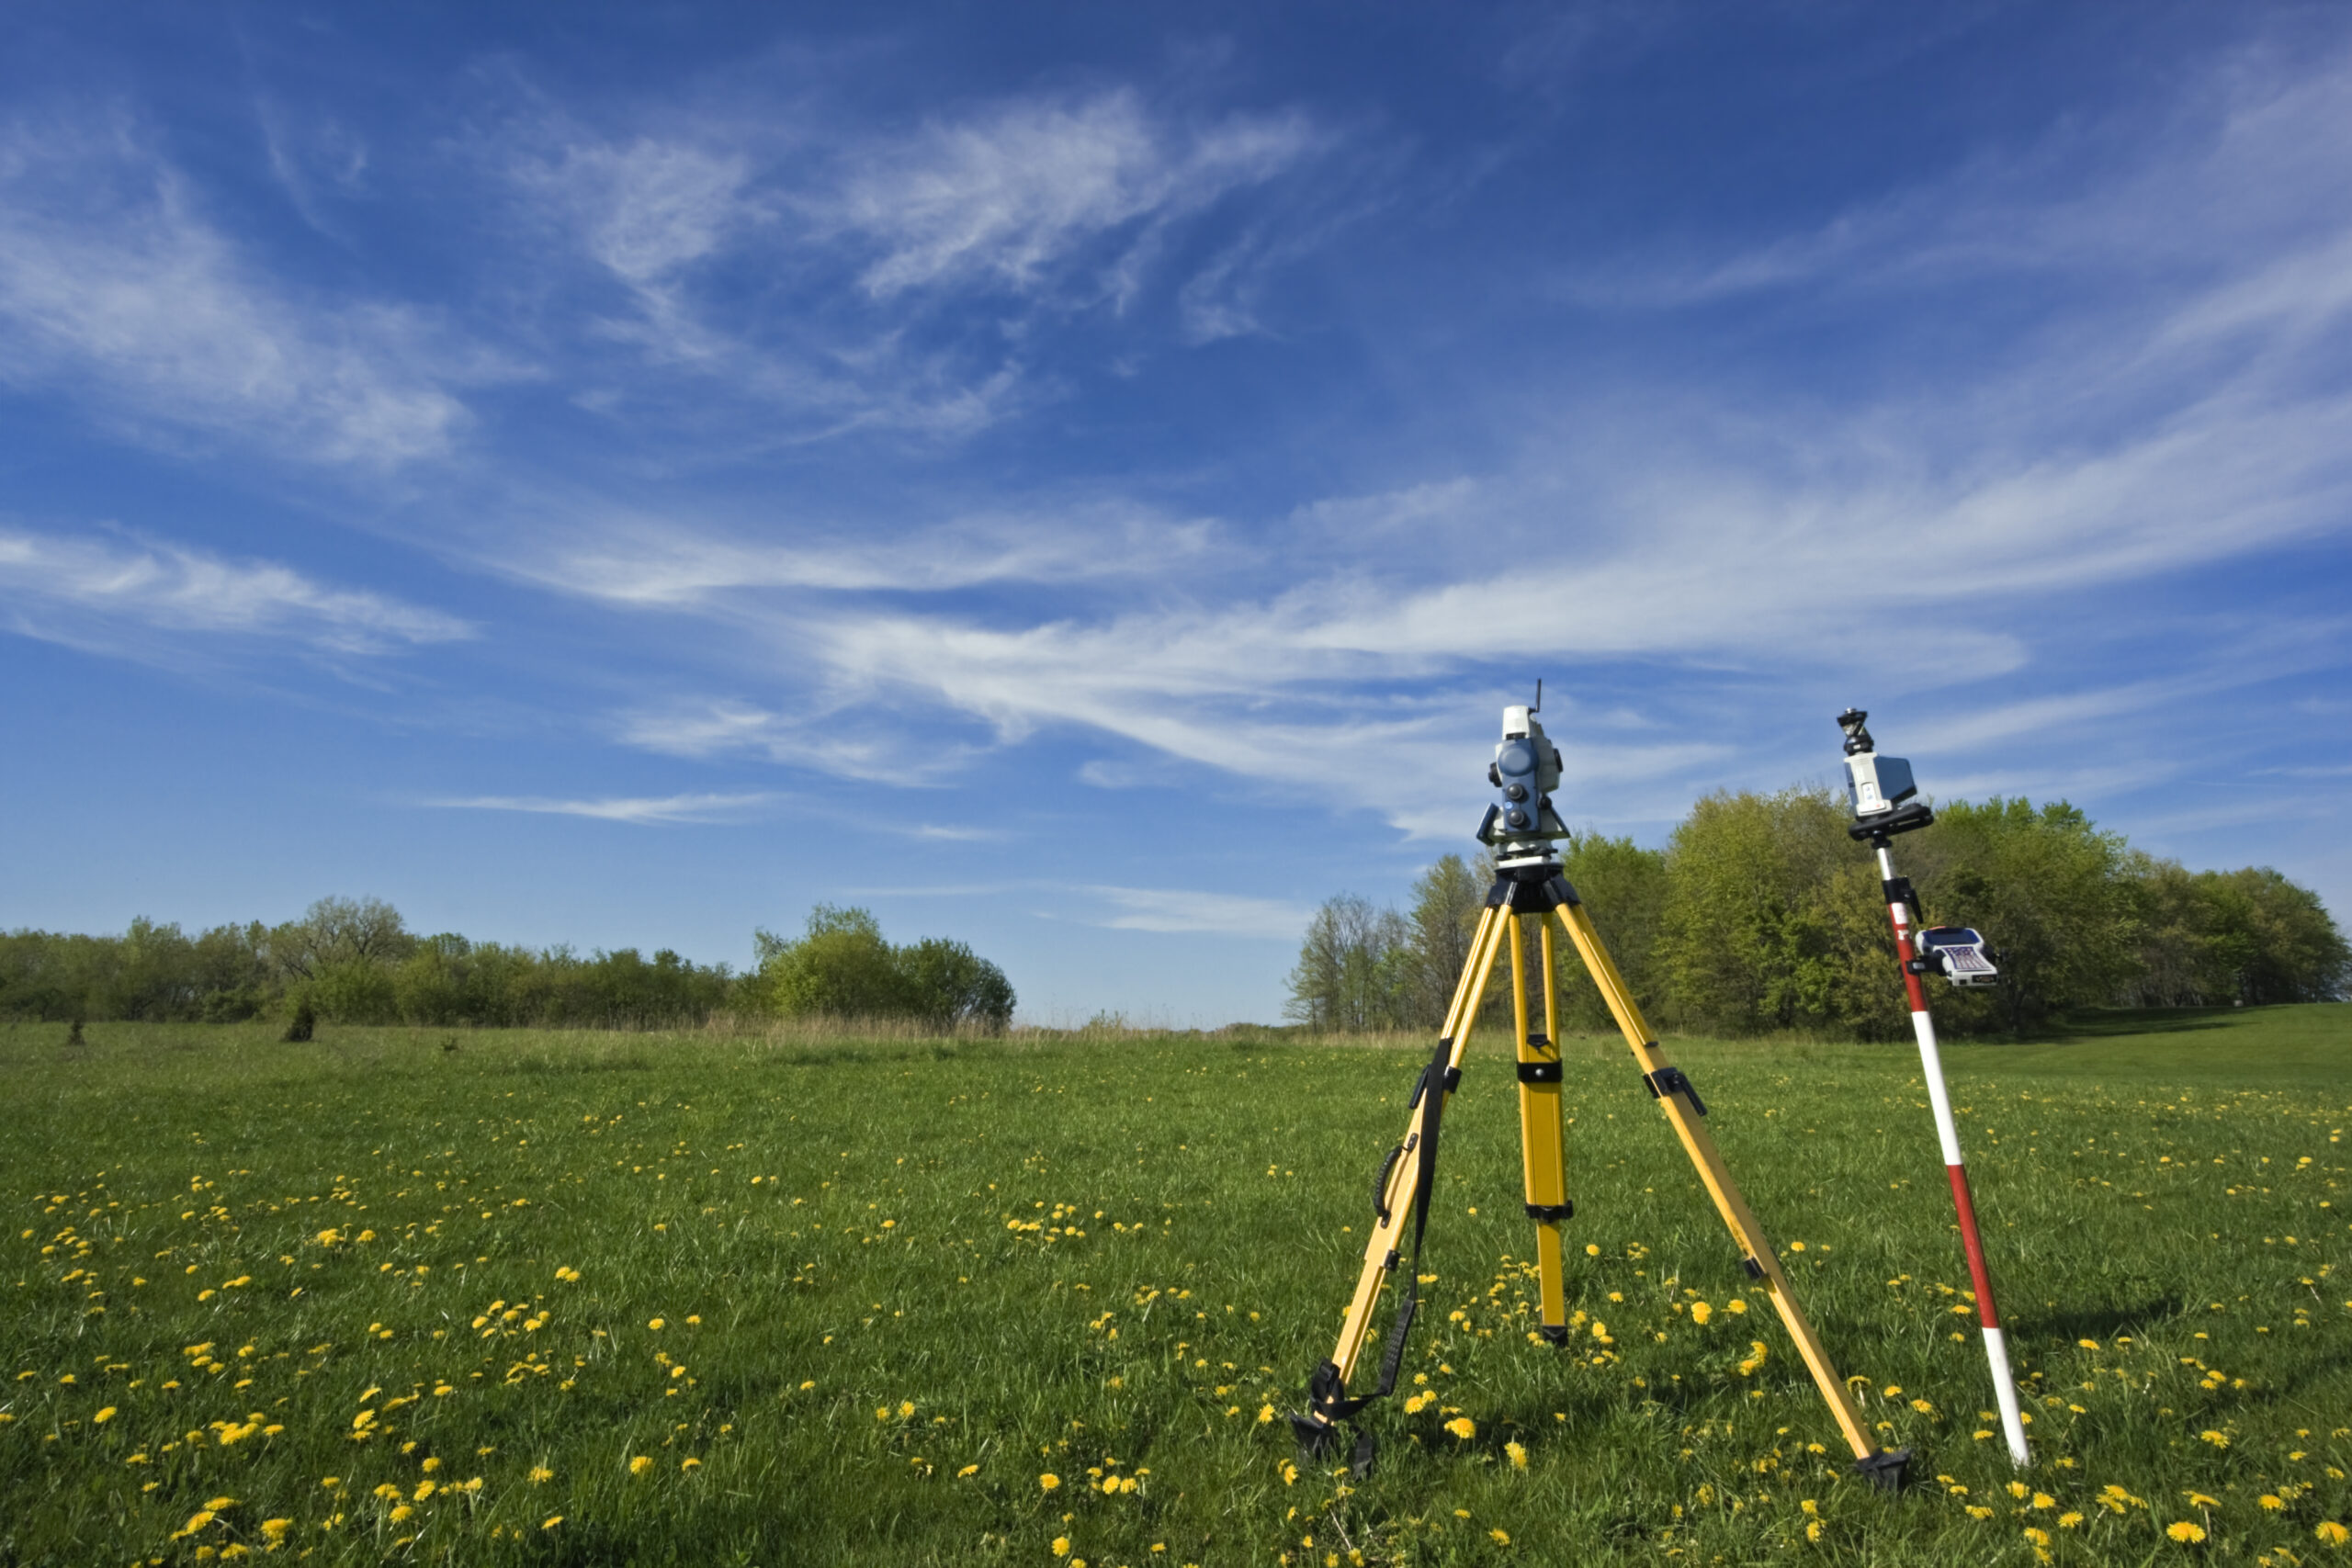 How Important is Technology When it Comes to Finding an Accurate Land Surveyor?